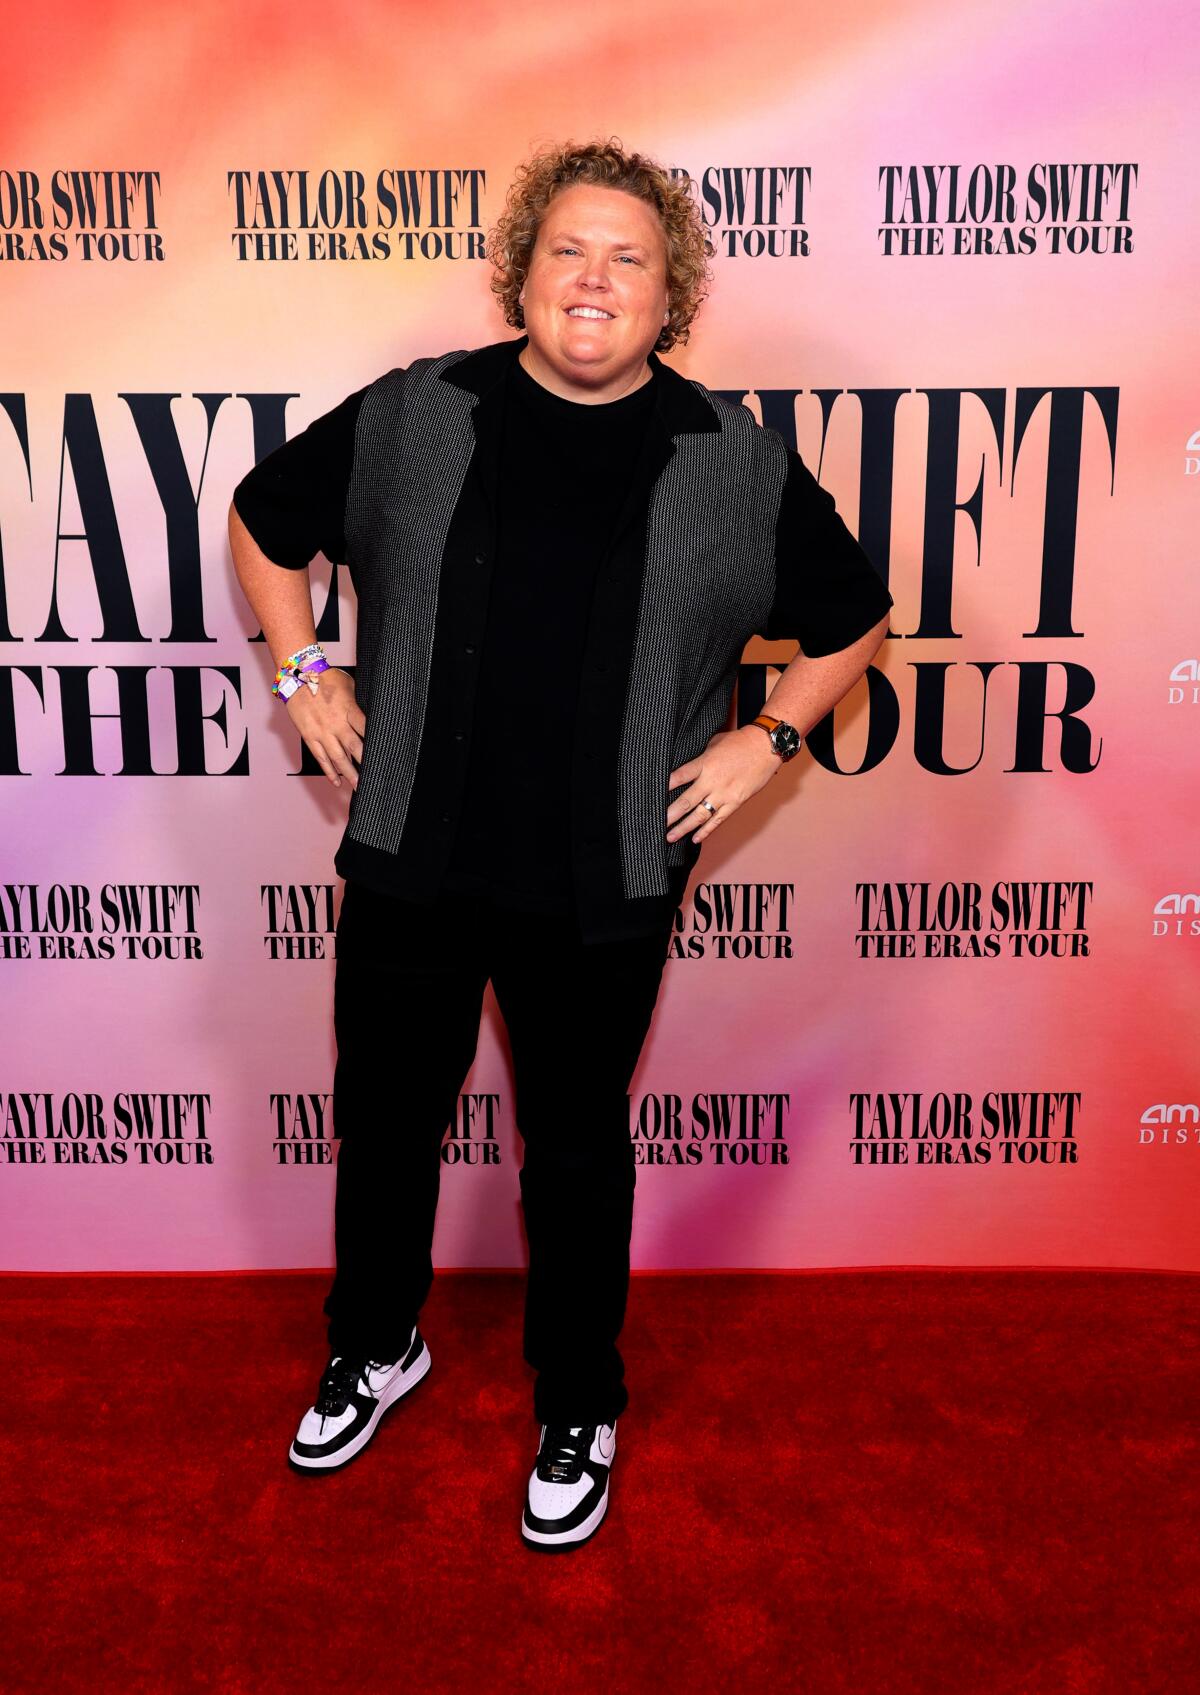 Fortune Feimster poses hands on hips in black pants, sneakers, a gray-and-black top and beaded bracelets